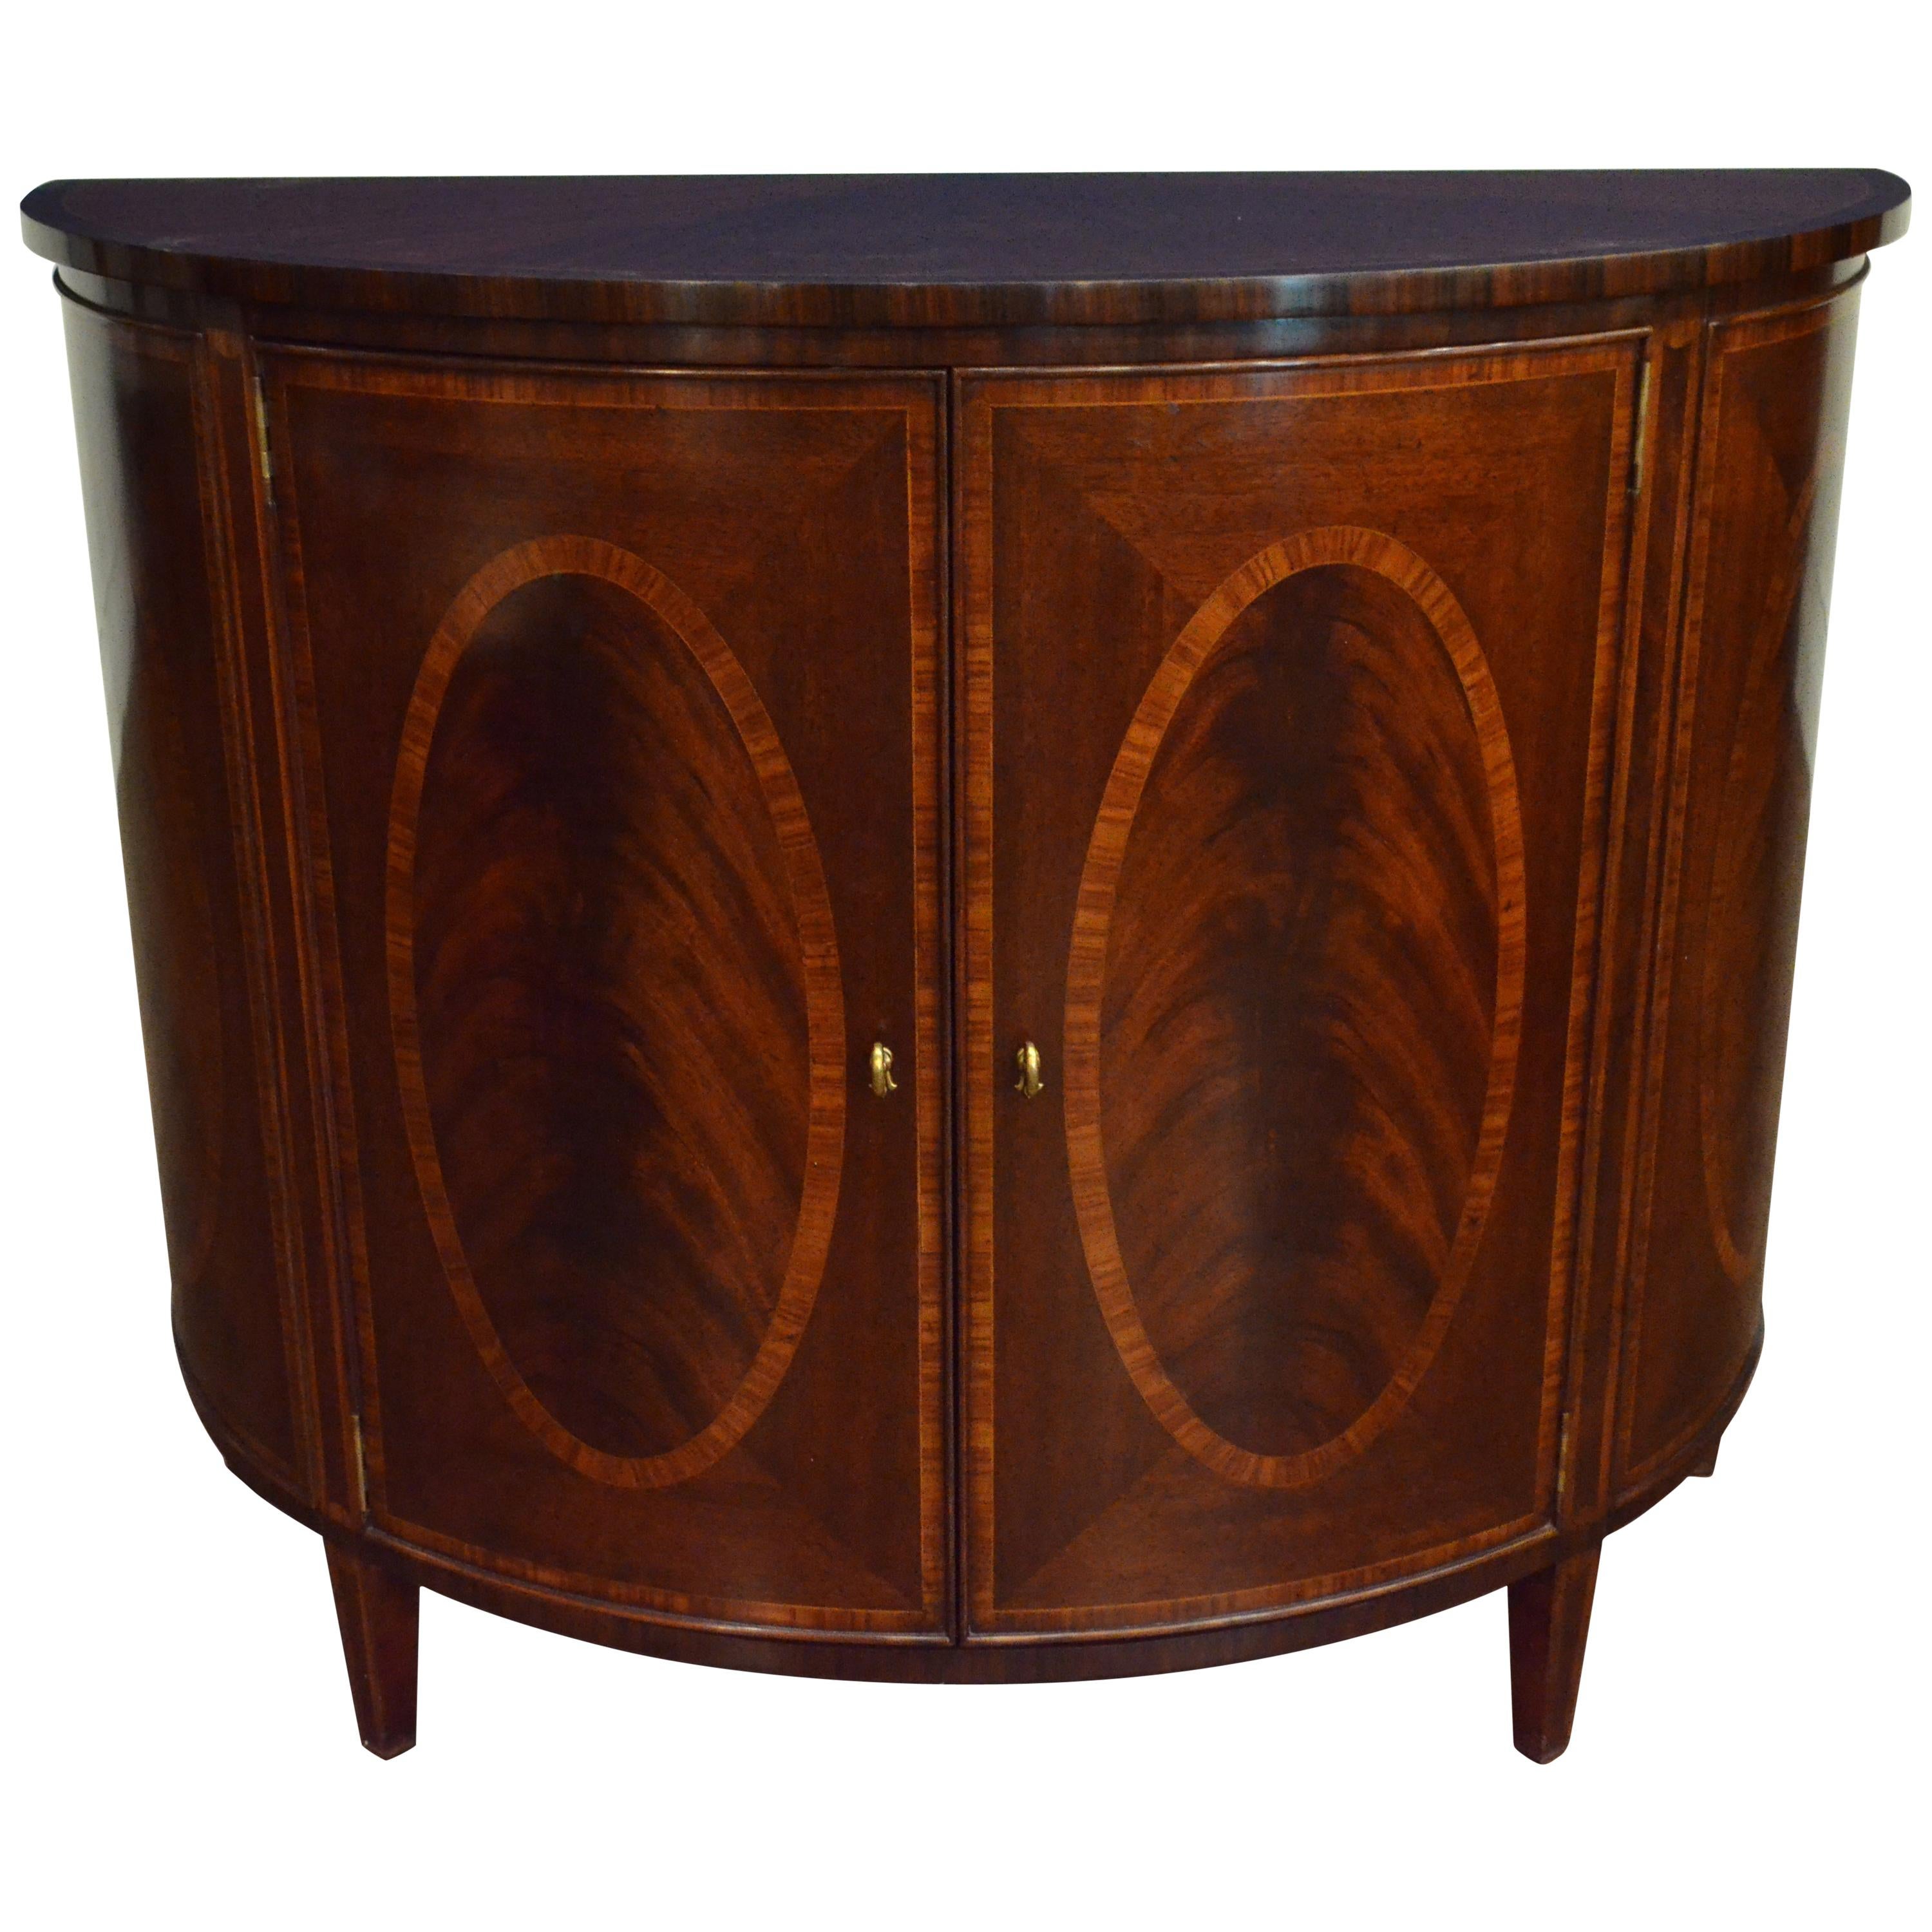 Hepplewhite Style Mahogany Demilune Cabinet by Leighton Hall For Sale